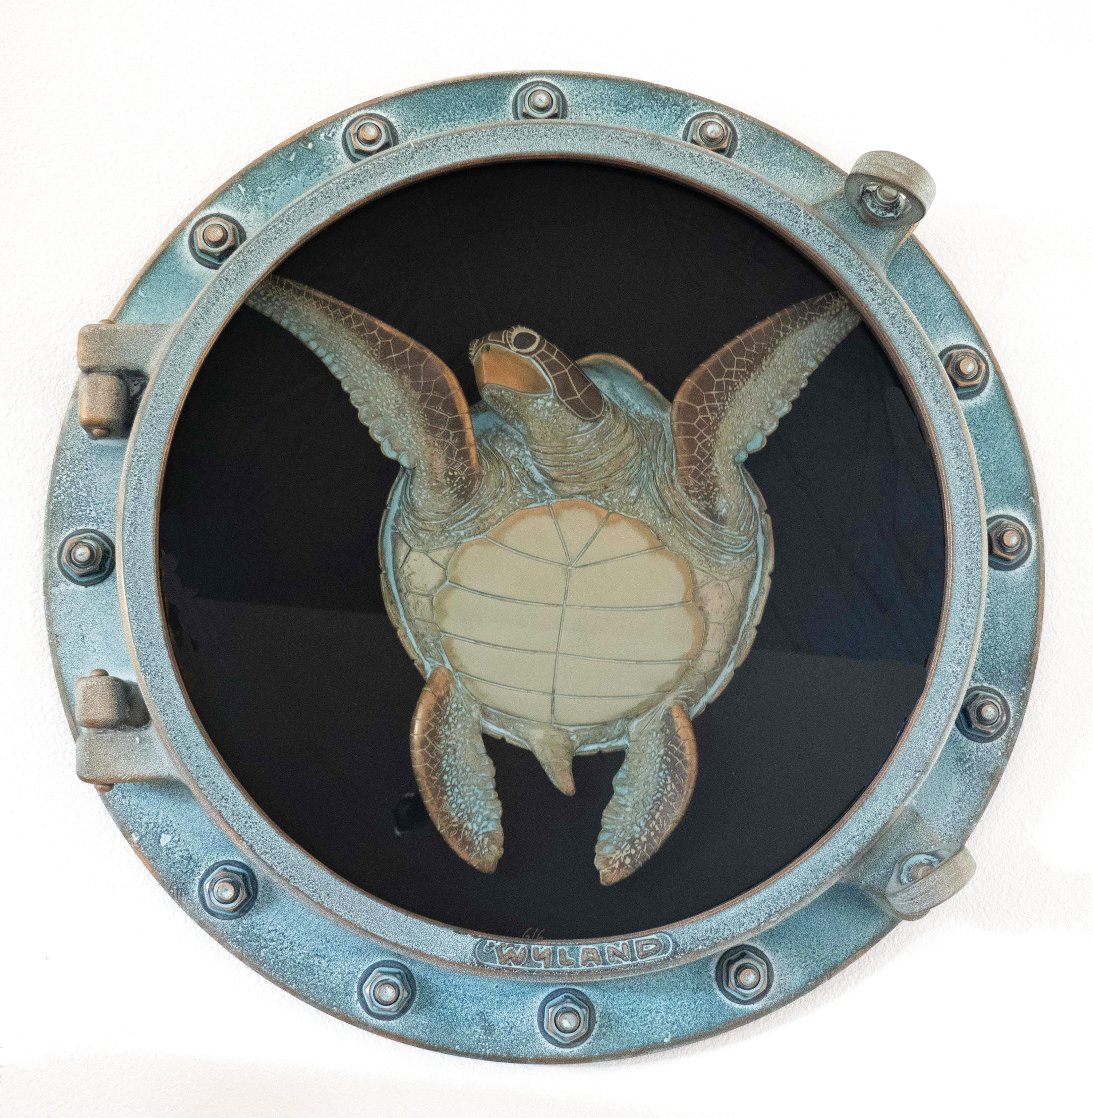 Eye of the Sea Turtle Porthole AP Bronze Sculpture 2015 24 in Sculpture by Robert Wyland